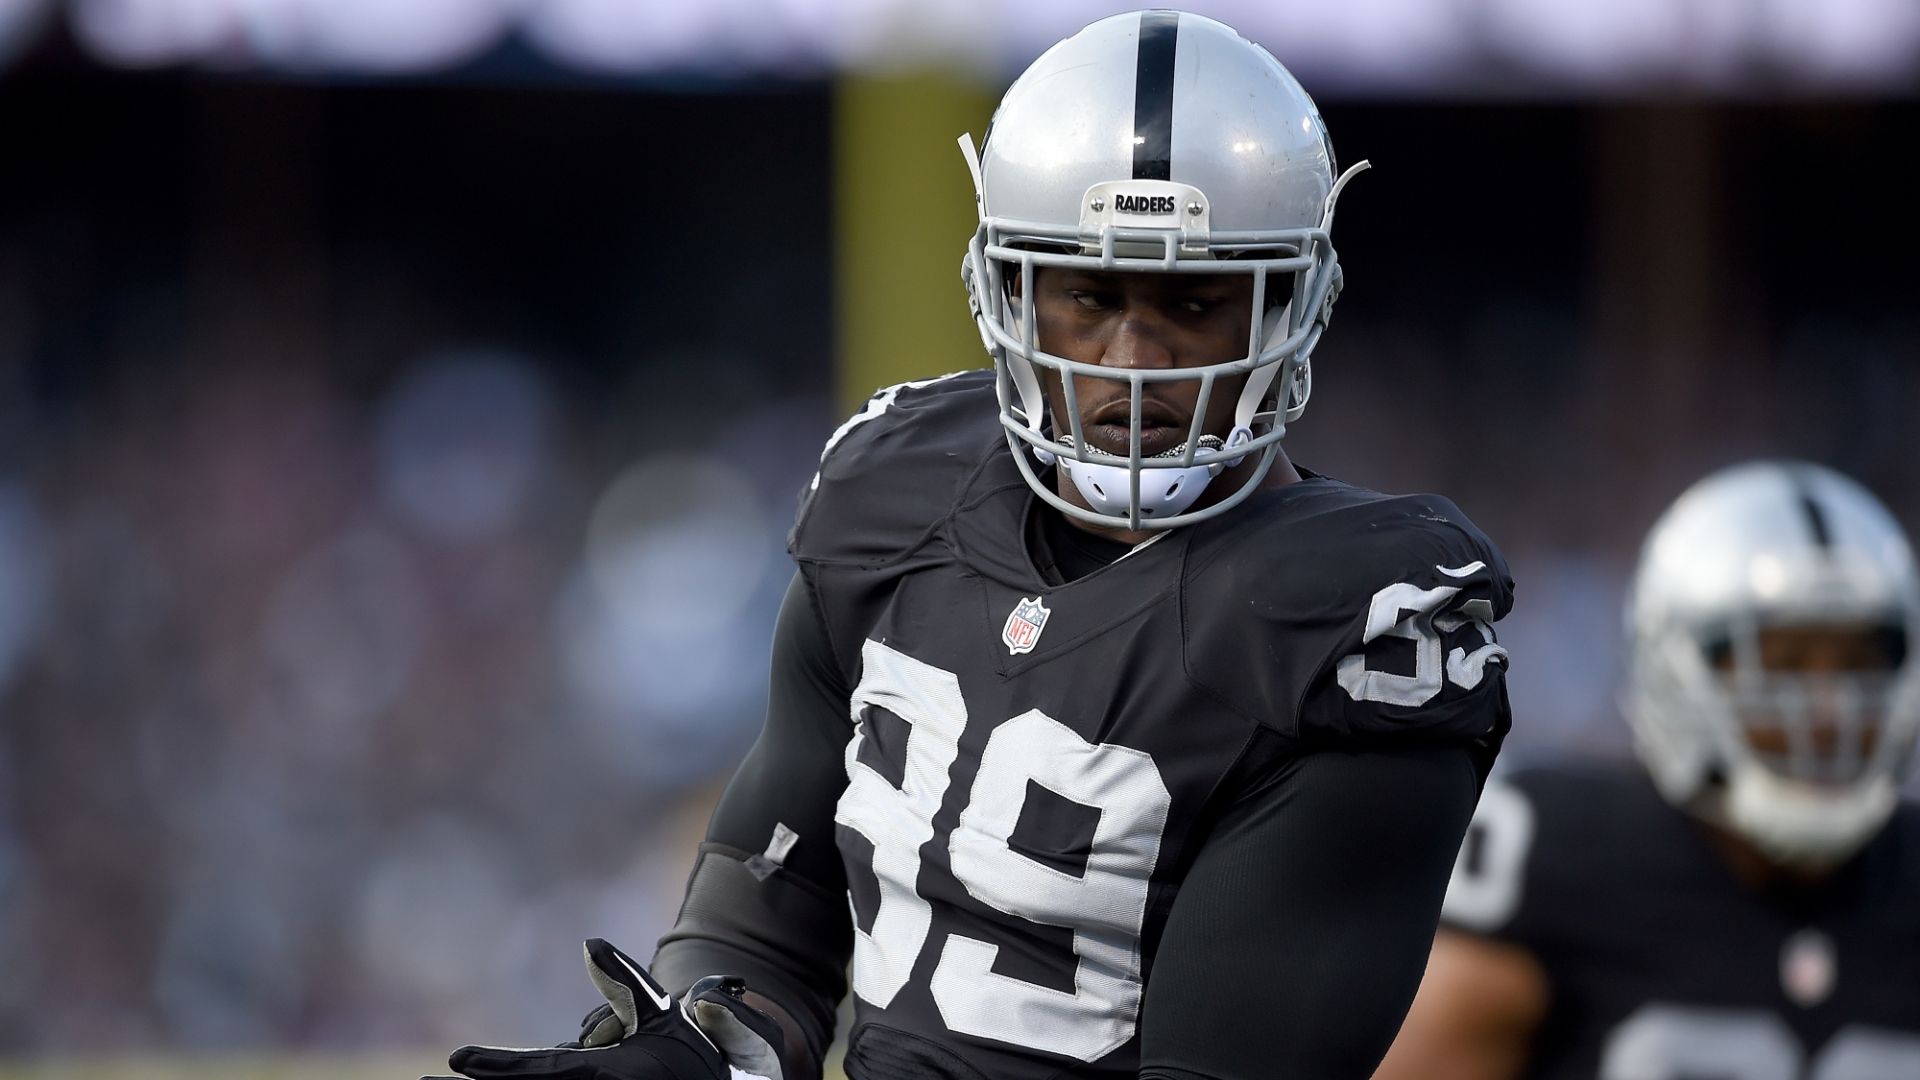 Smith can still be a dynamic pass rusher for Raiders